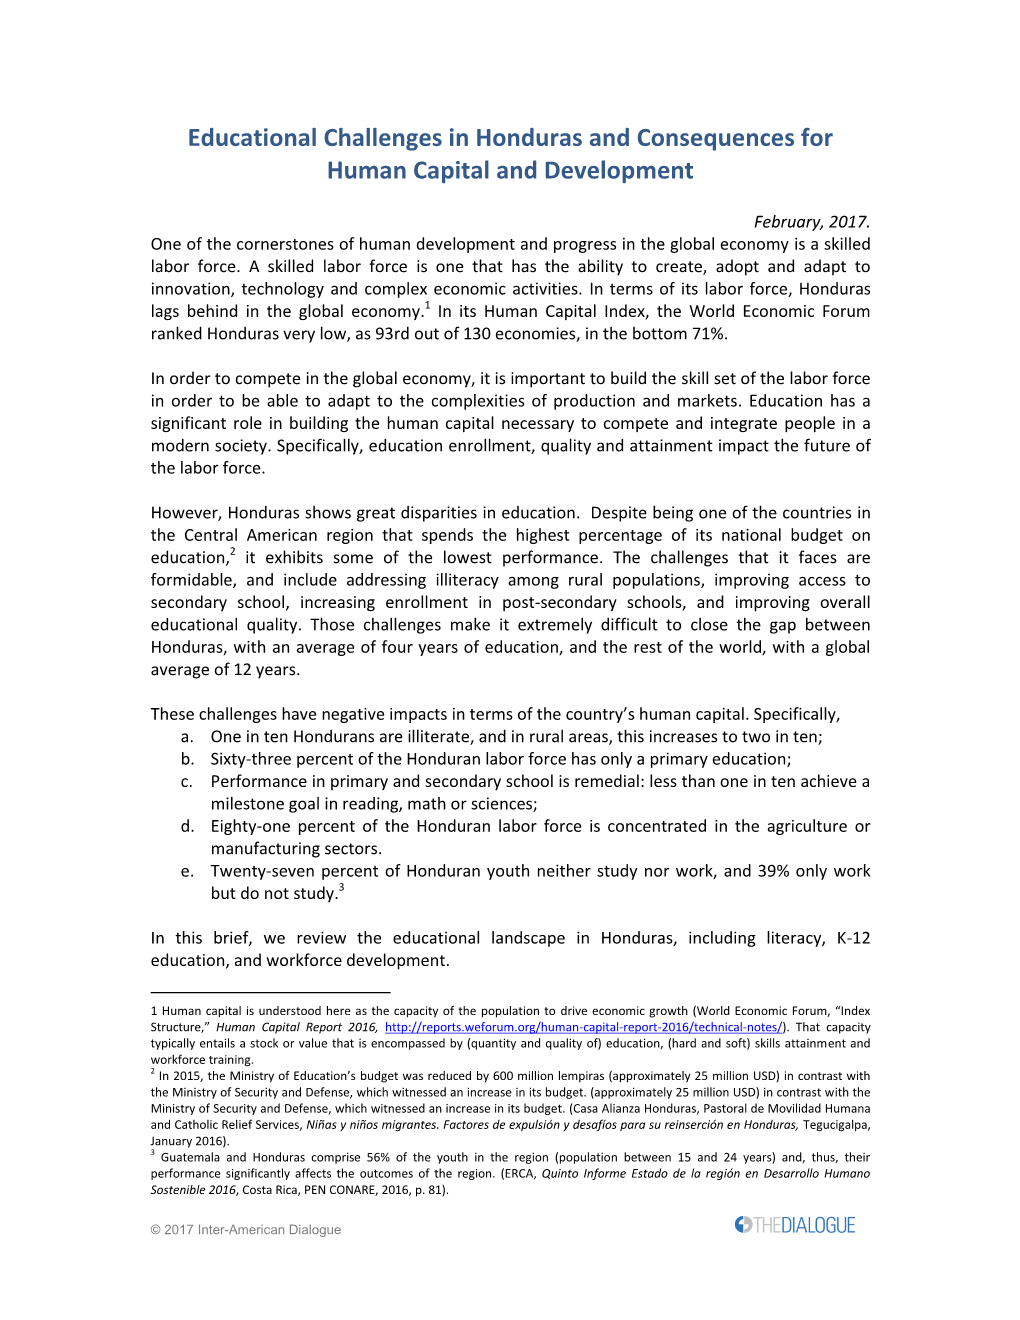 Educational Challenges in Honduras and Consequences for Human Capital and Development